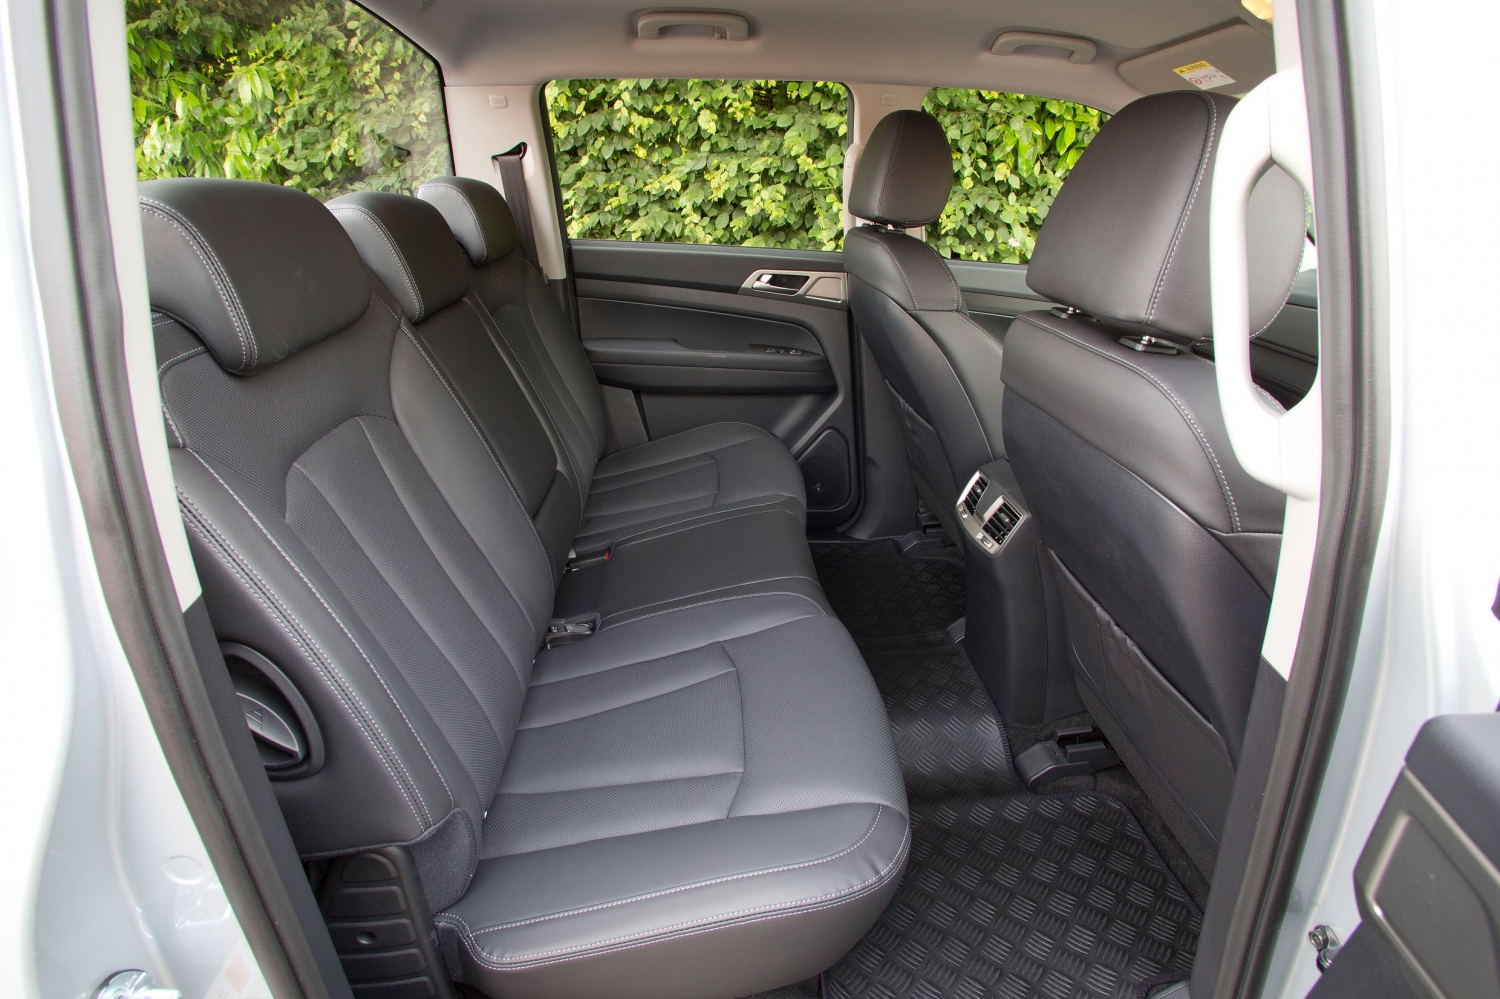 Ssangyong Musso rear seats